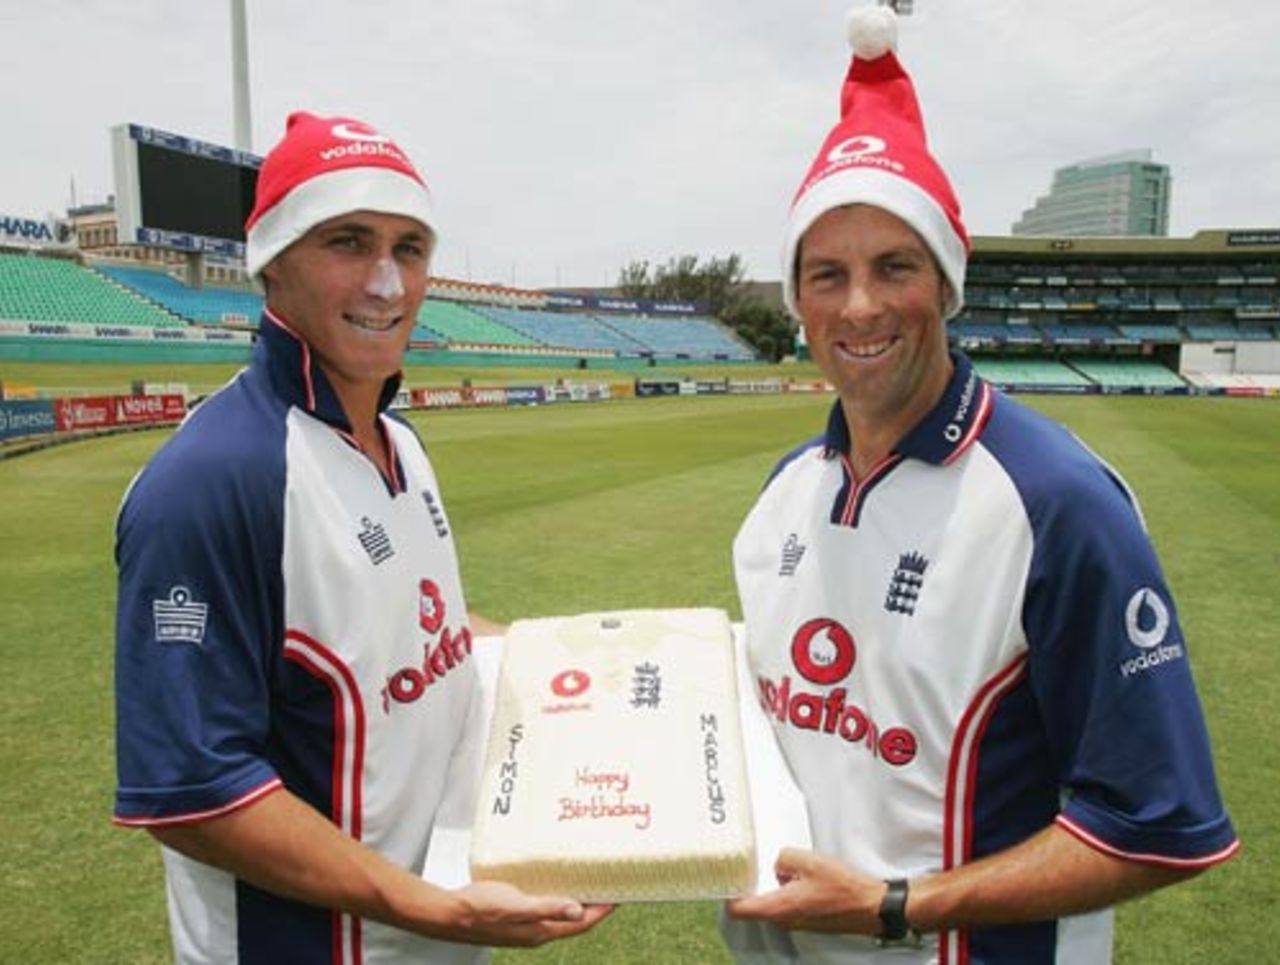 Marcus Trescothick and Simon Jones celebrate their birthday ahead of the Boxing Day Test, Durban, December 25 2004